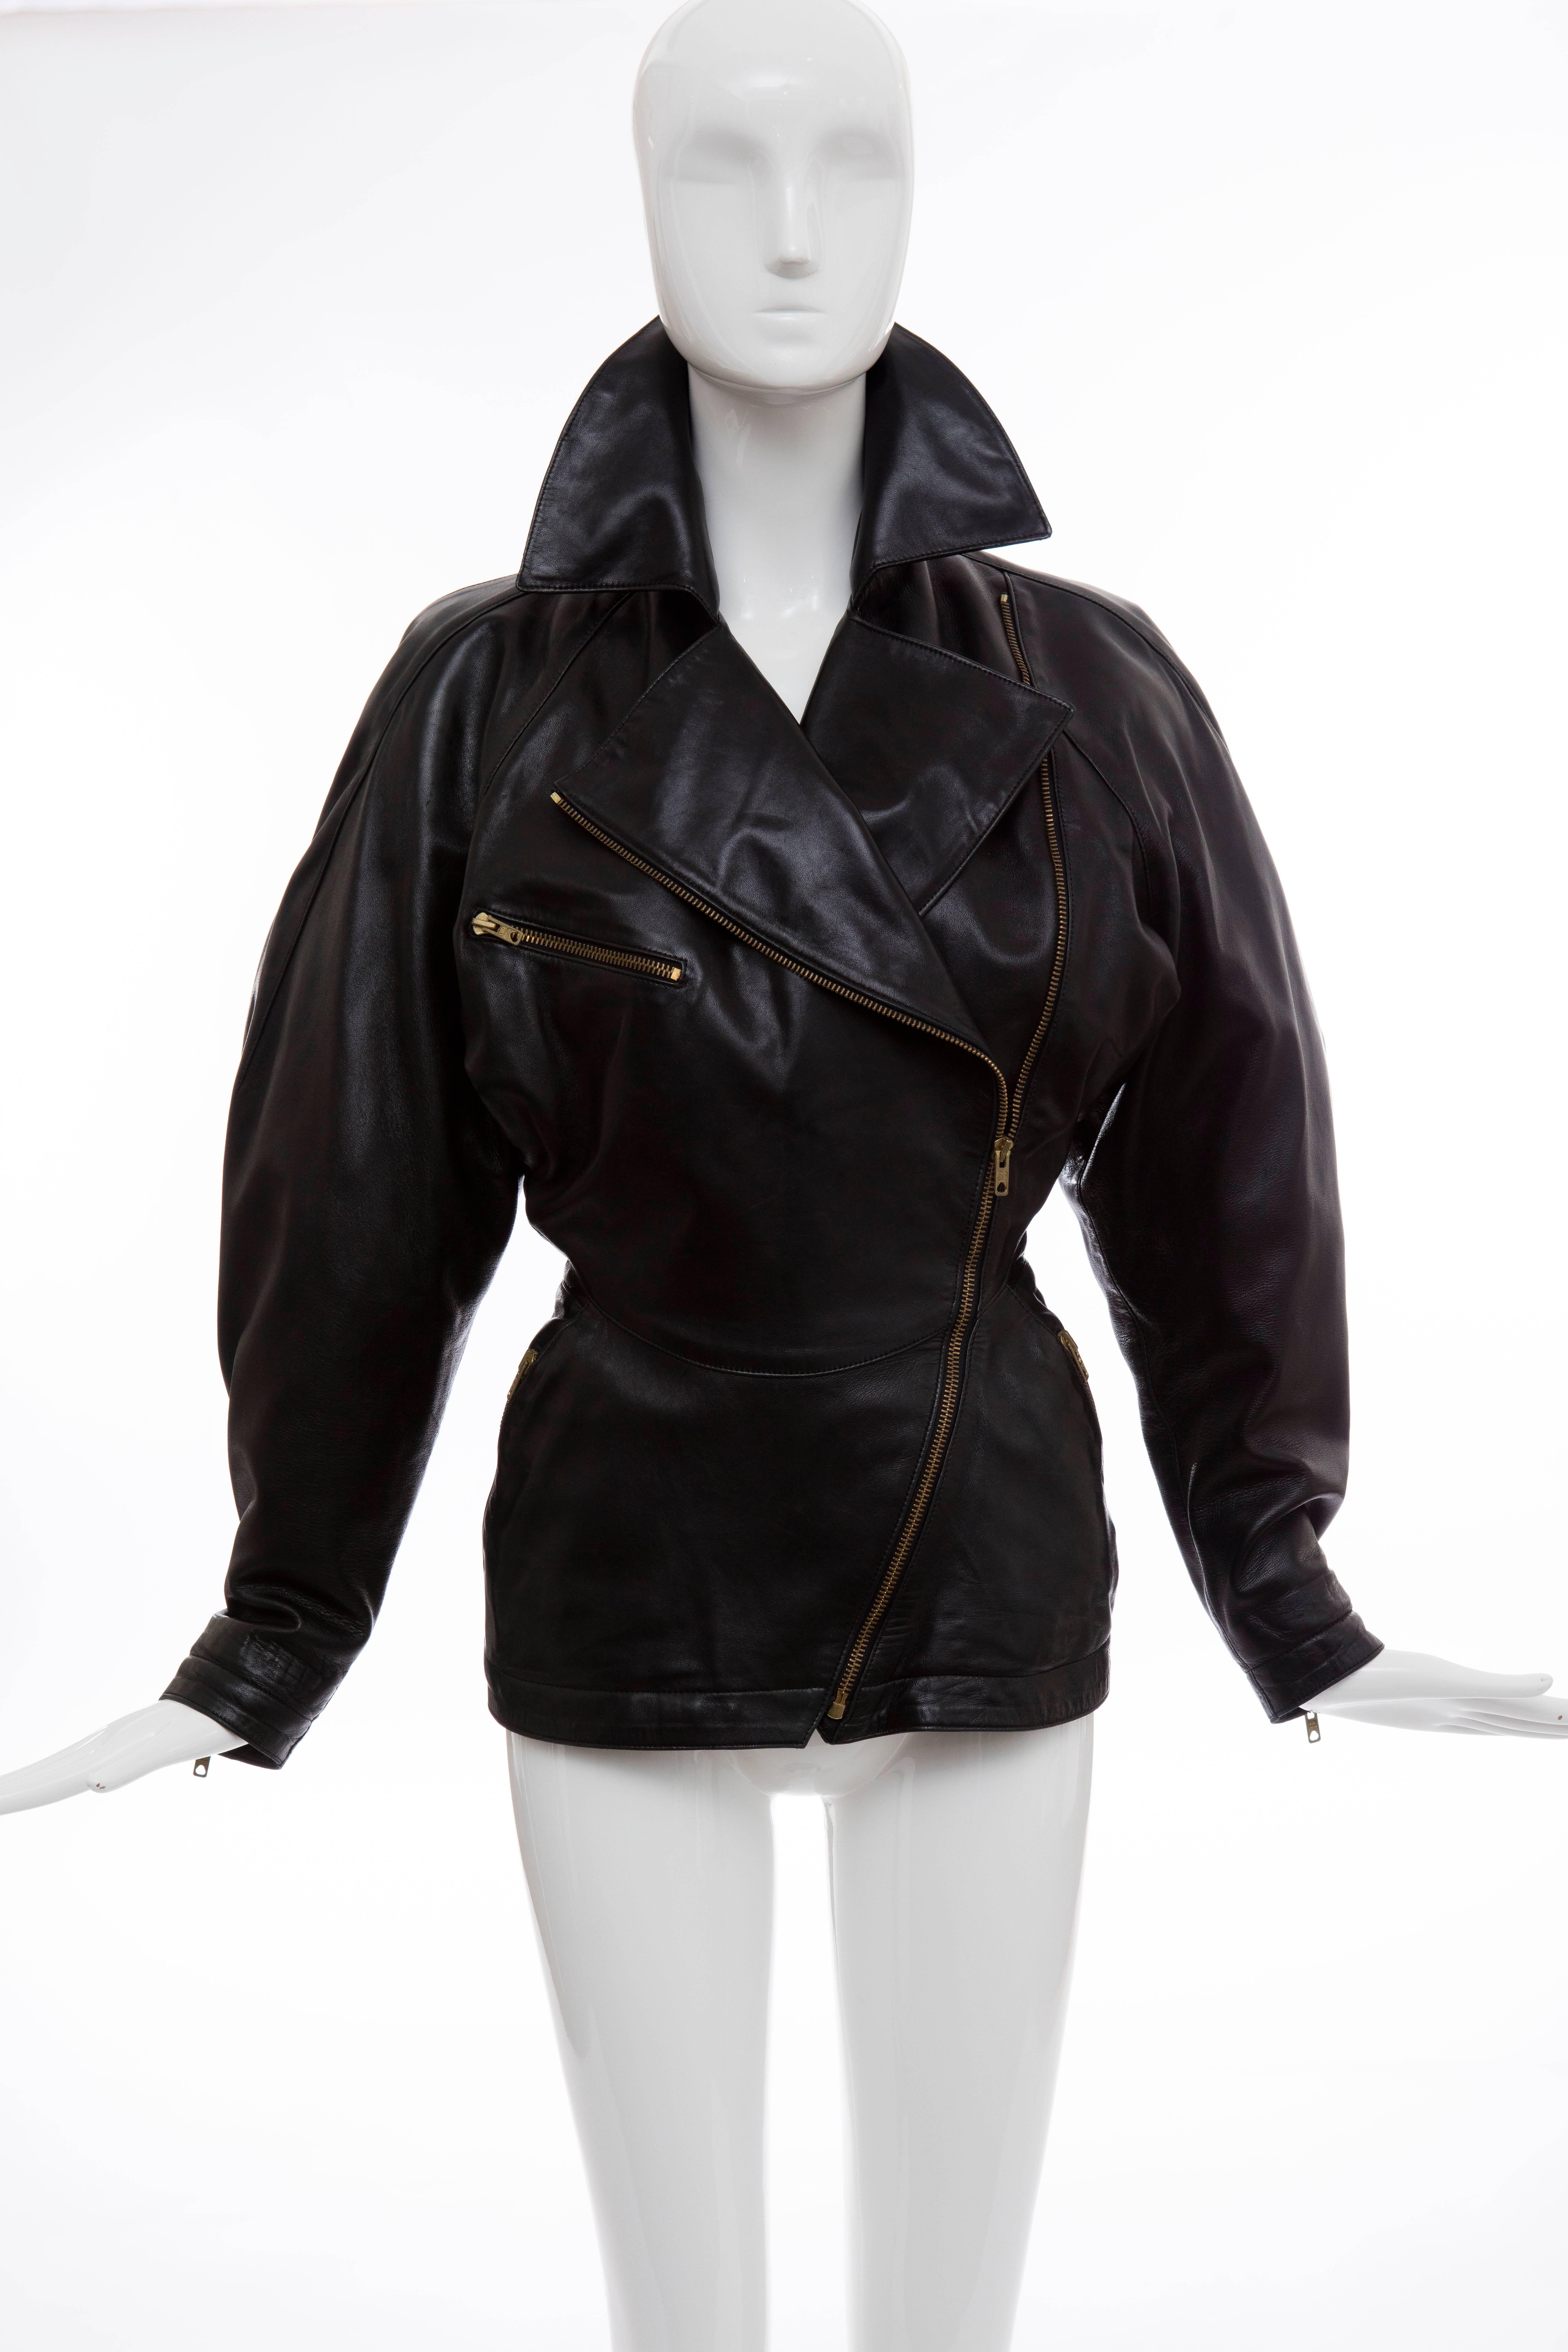 Azzedine Alai, circa 1986 black leather jacket with Eclaire zipper pulls and  hardware with zippered pockets and sleeve cuffs in an antiqued gold-tone finish, notched lapel and fully lined in black acetate with signature cloth label.
 
FR. 38
US.